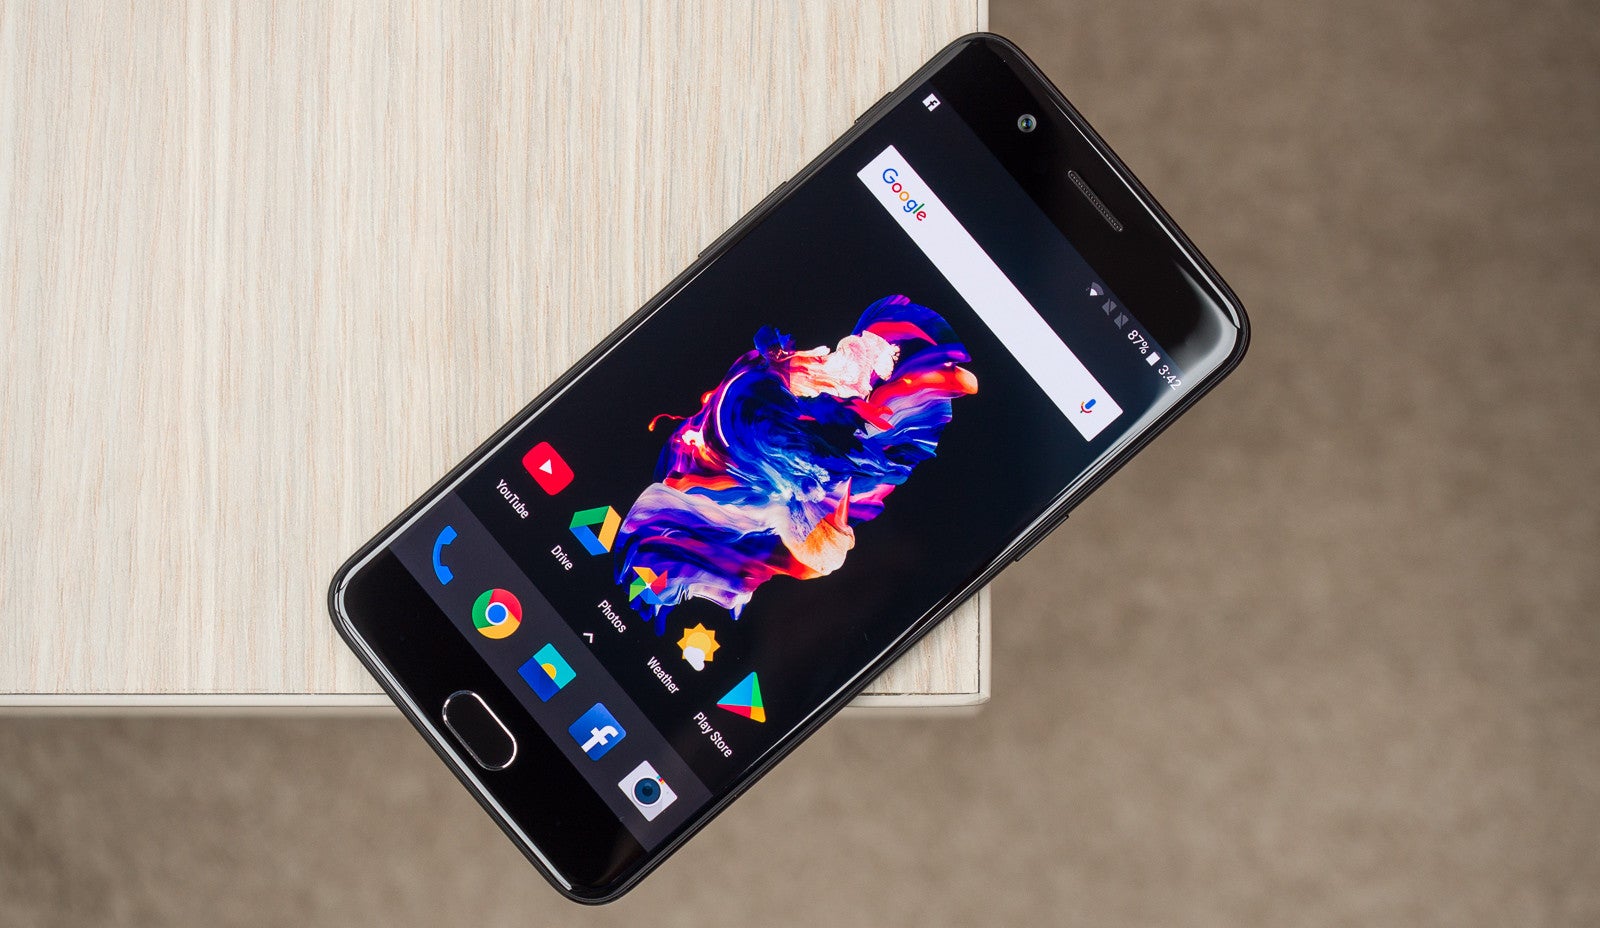 OnePlus 5's new OxygenOS 4.5.14 update adds security patches, optimizations